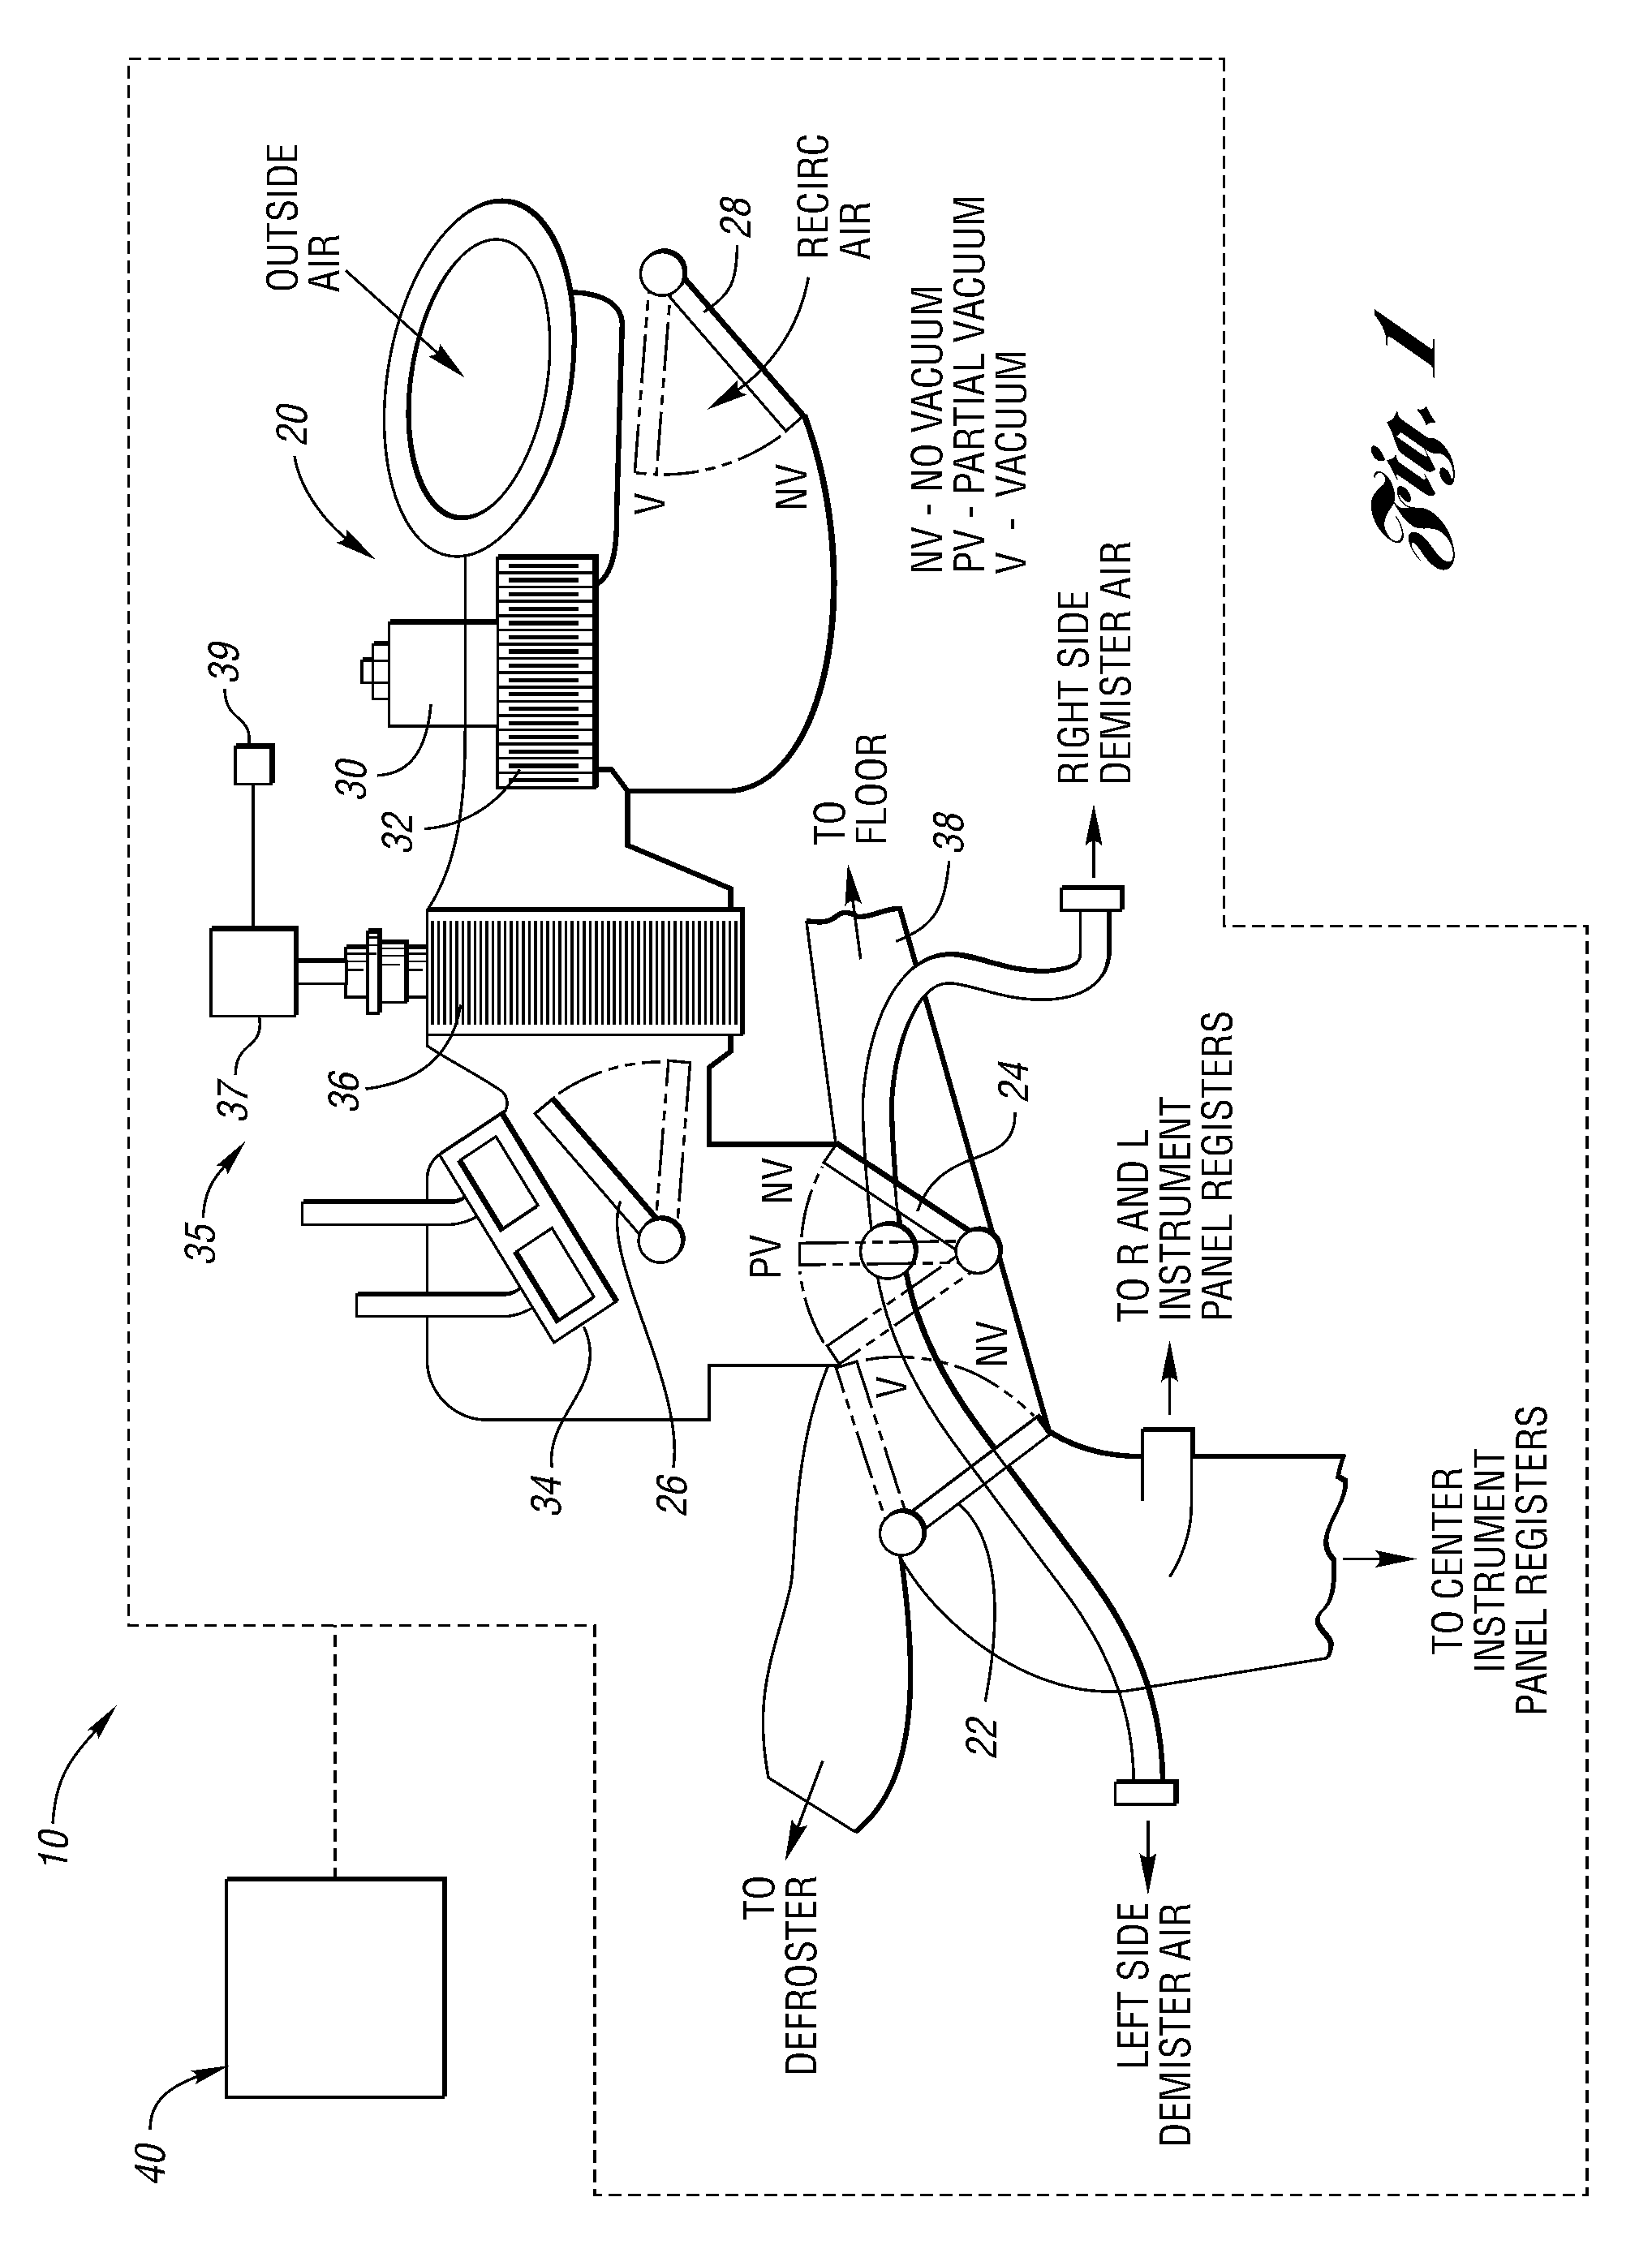 System and method for environmental management of a vehicle